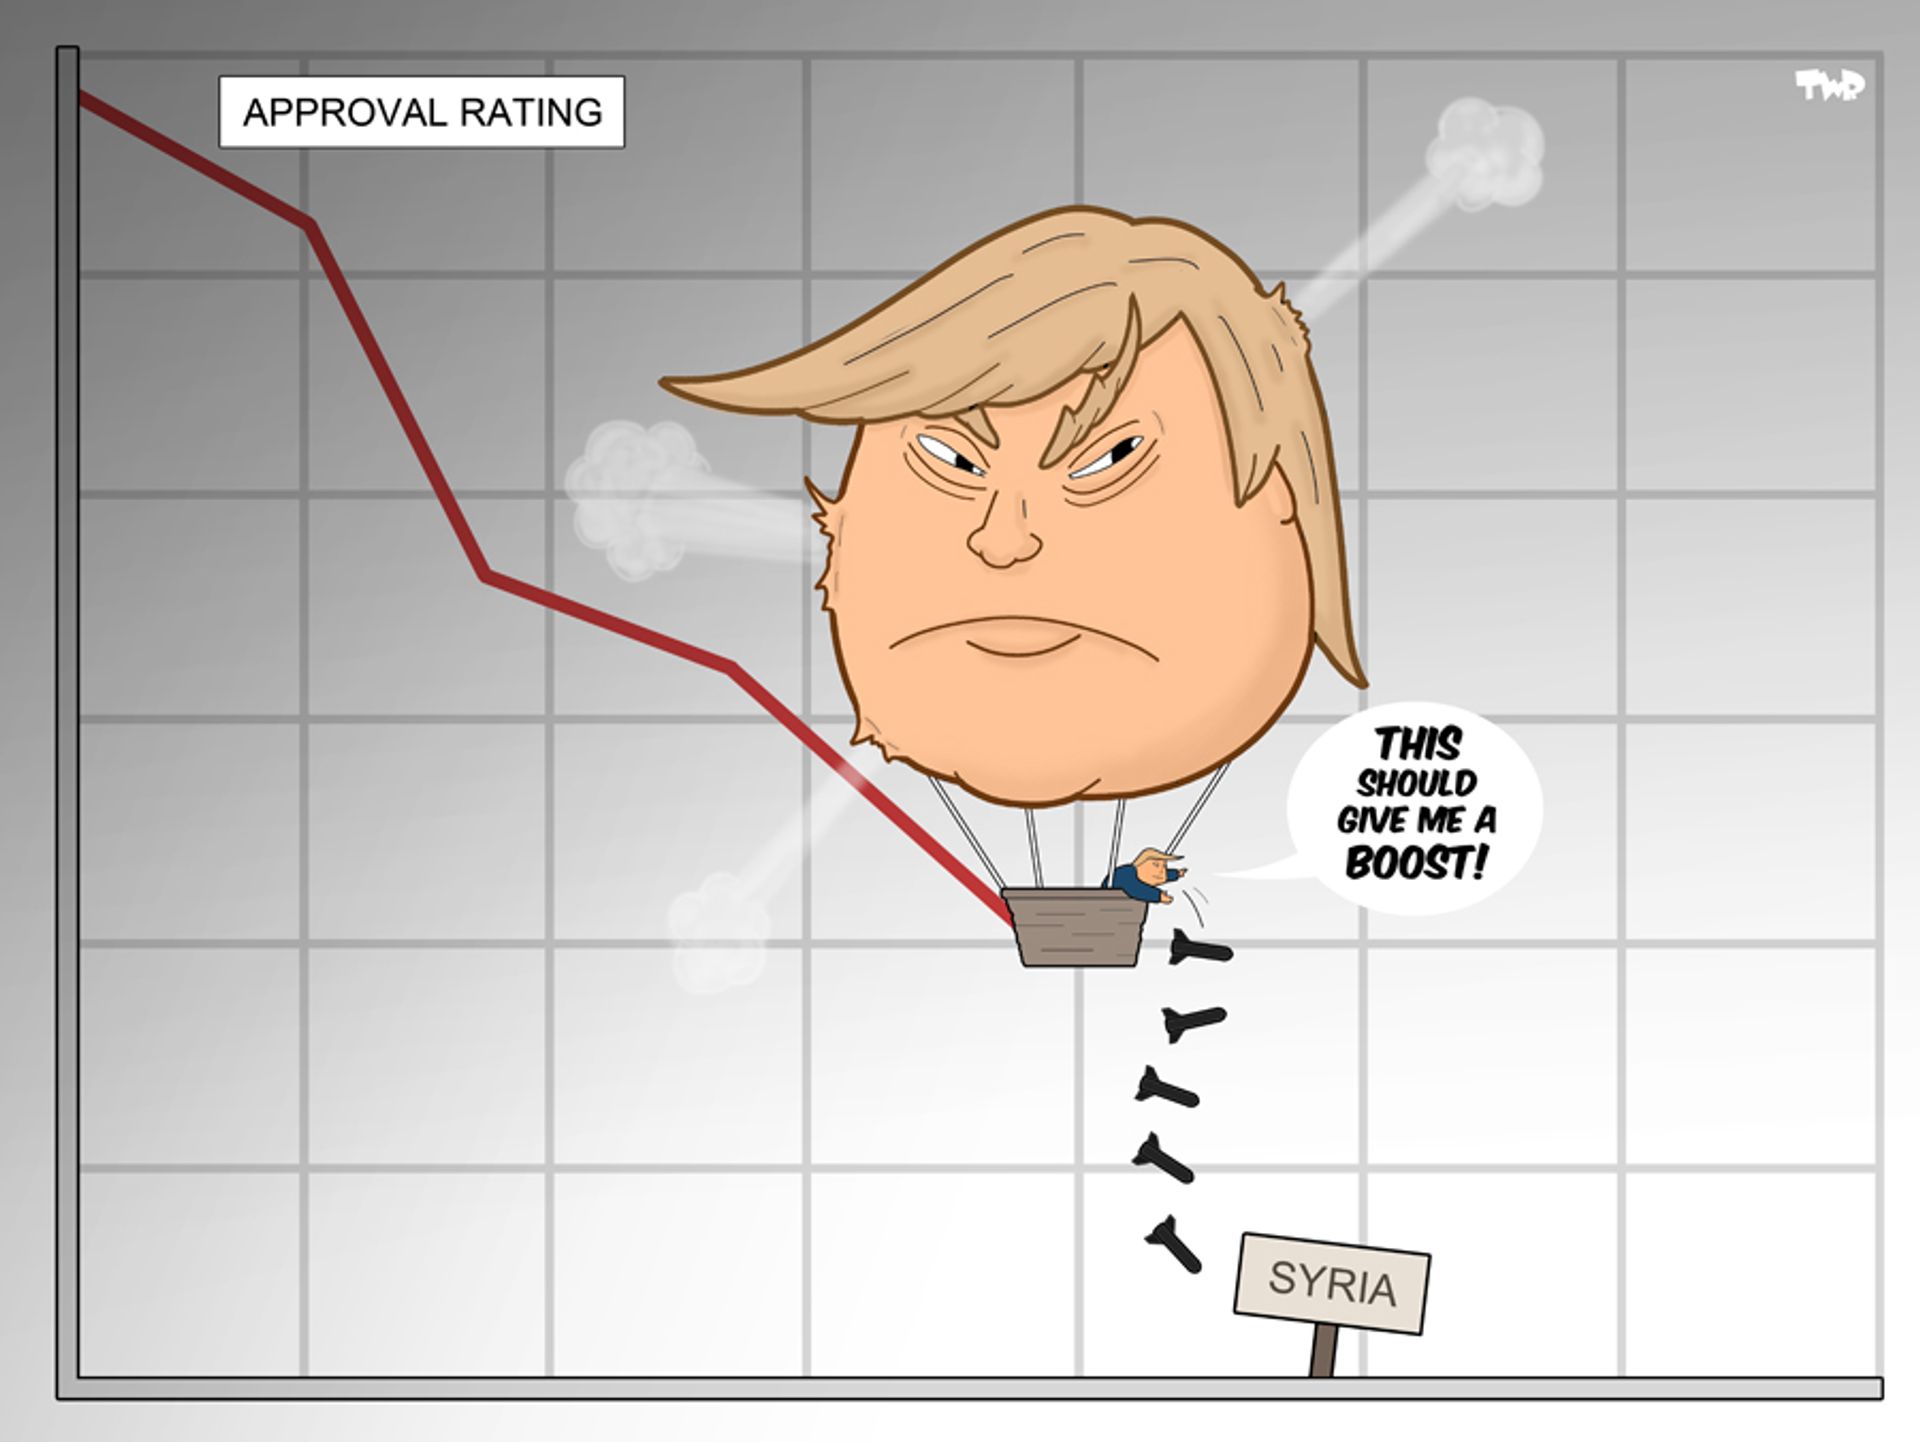 170412 Trump approval rating